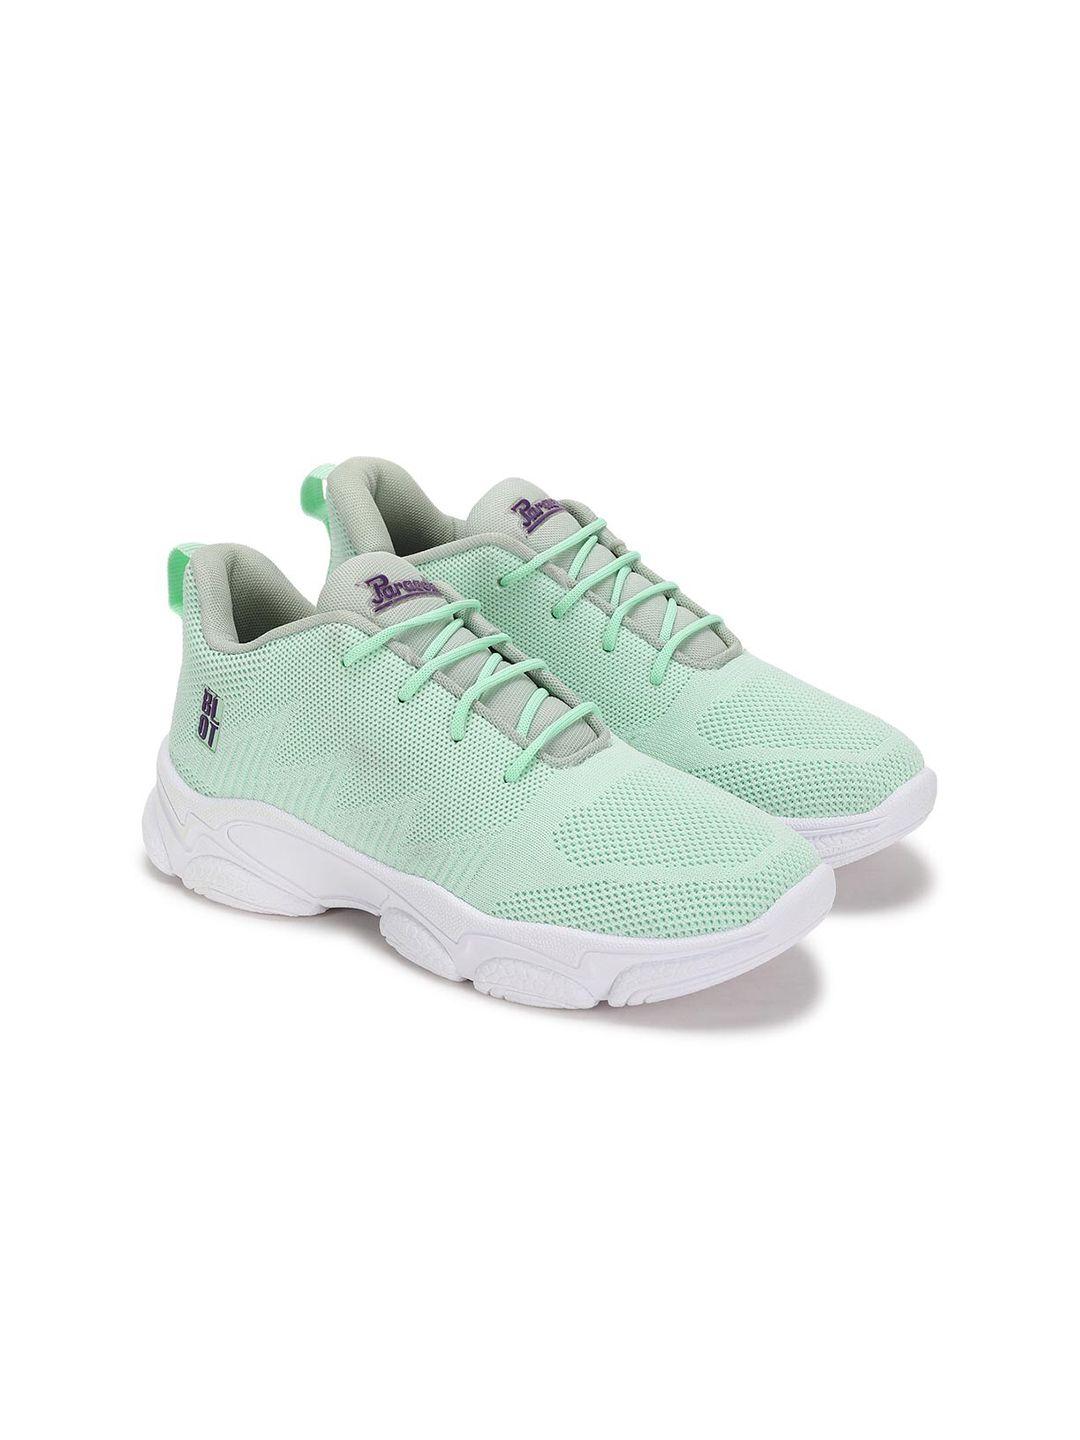 paragon women textured lightweight breathable sneakers